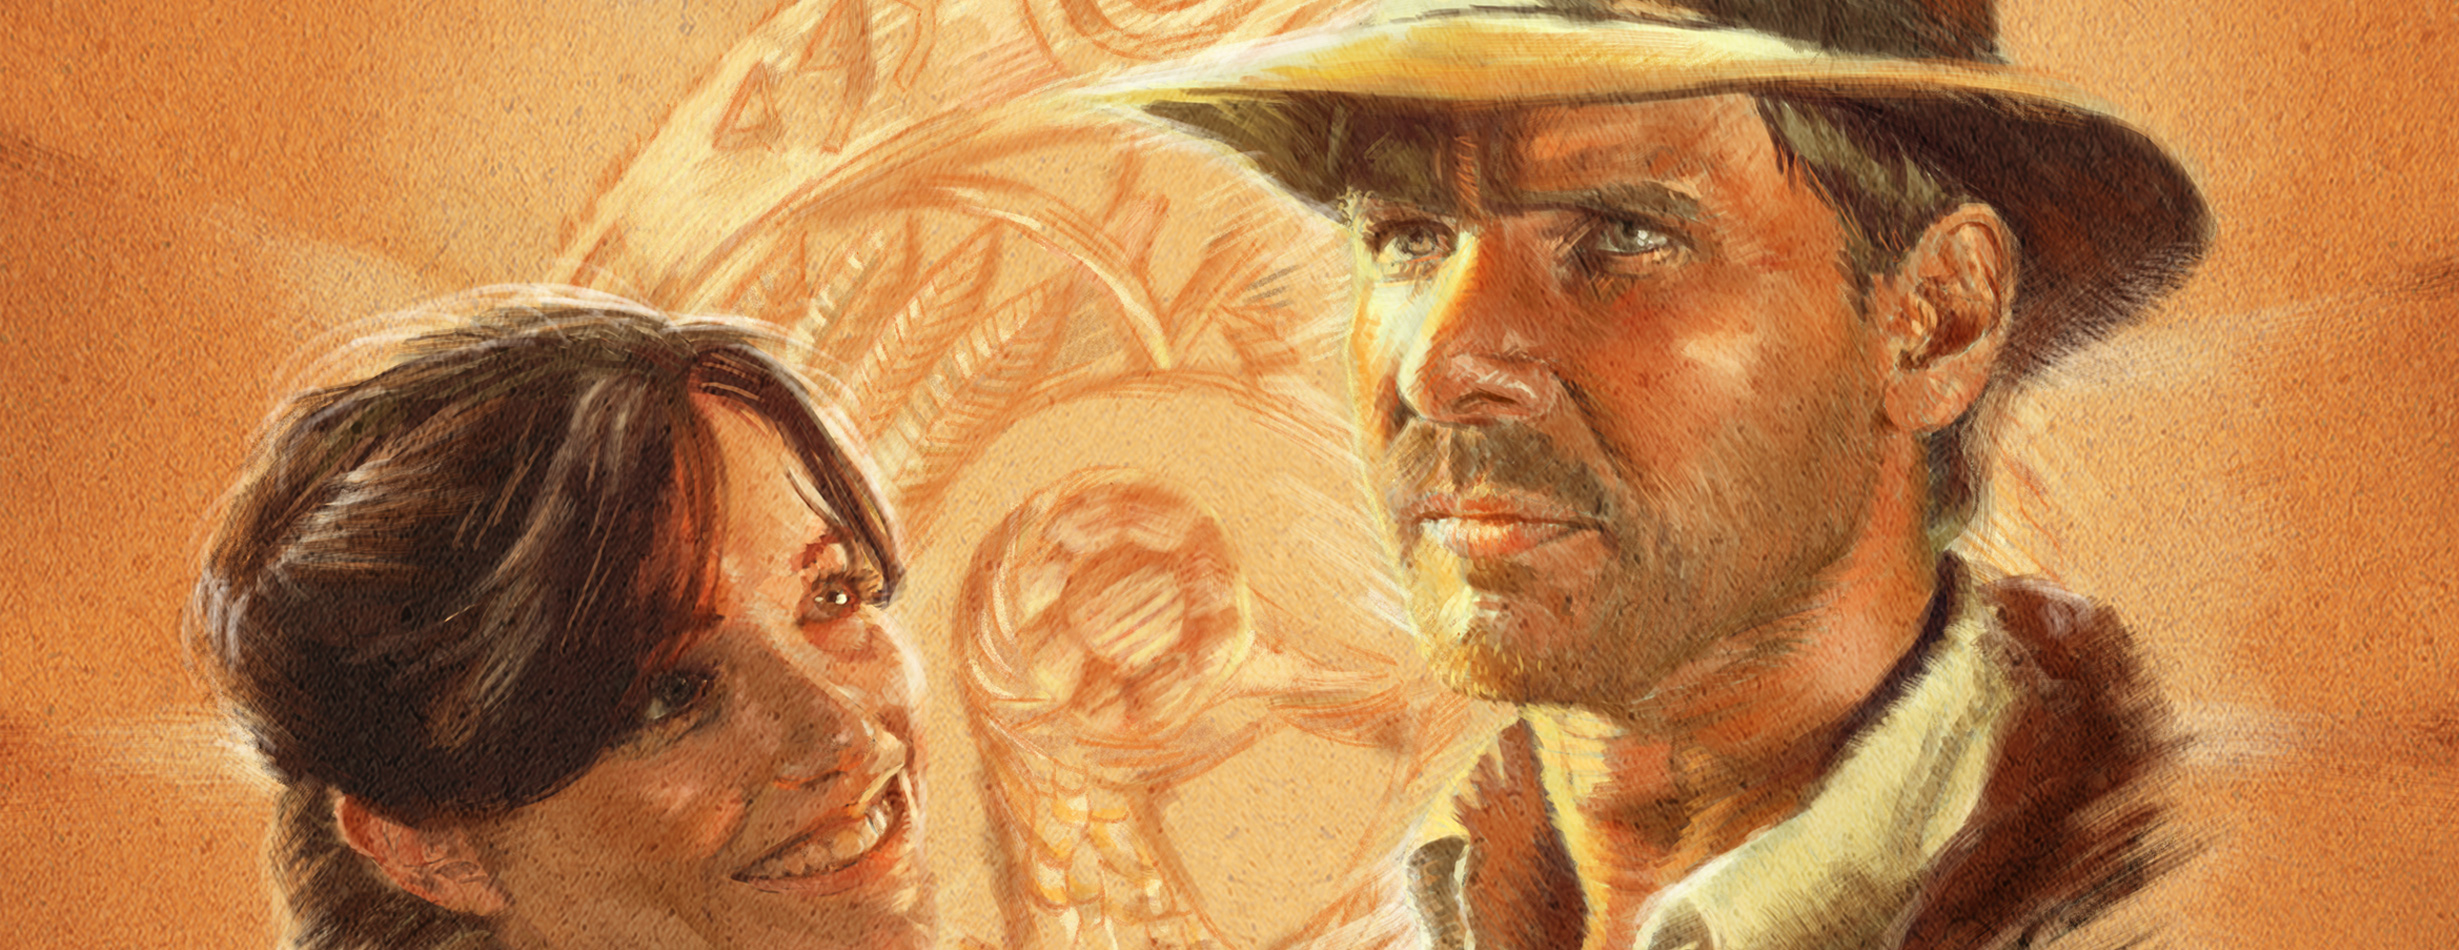 Indiana Jones and Raiders of the Lost Ark